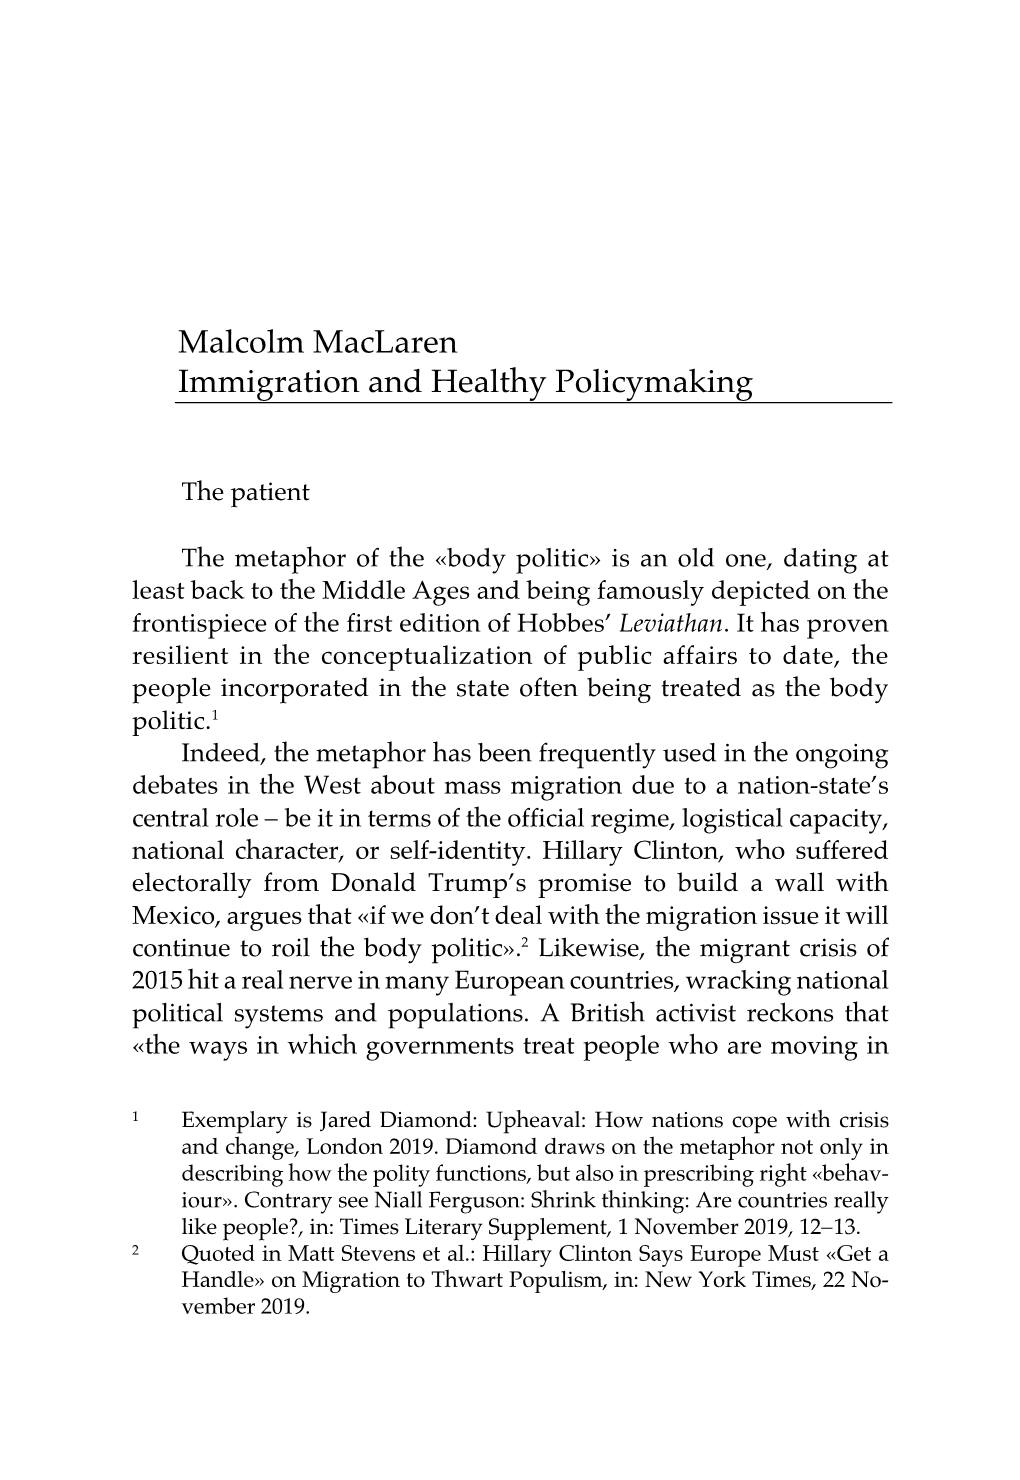 Malcolm Maclaren Immigration and Healthy Policymaking